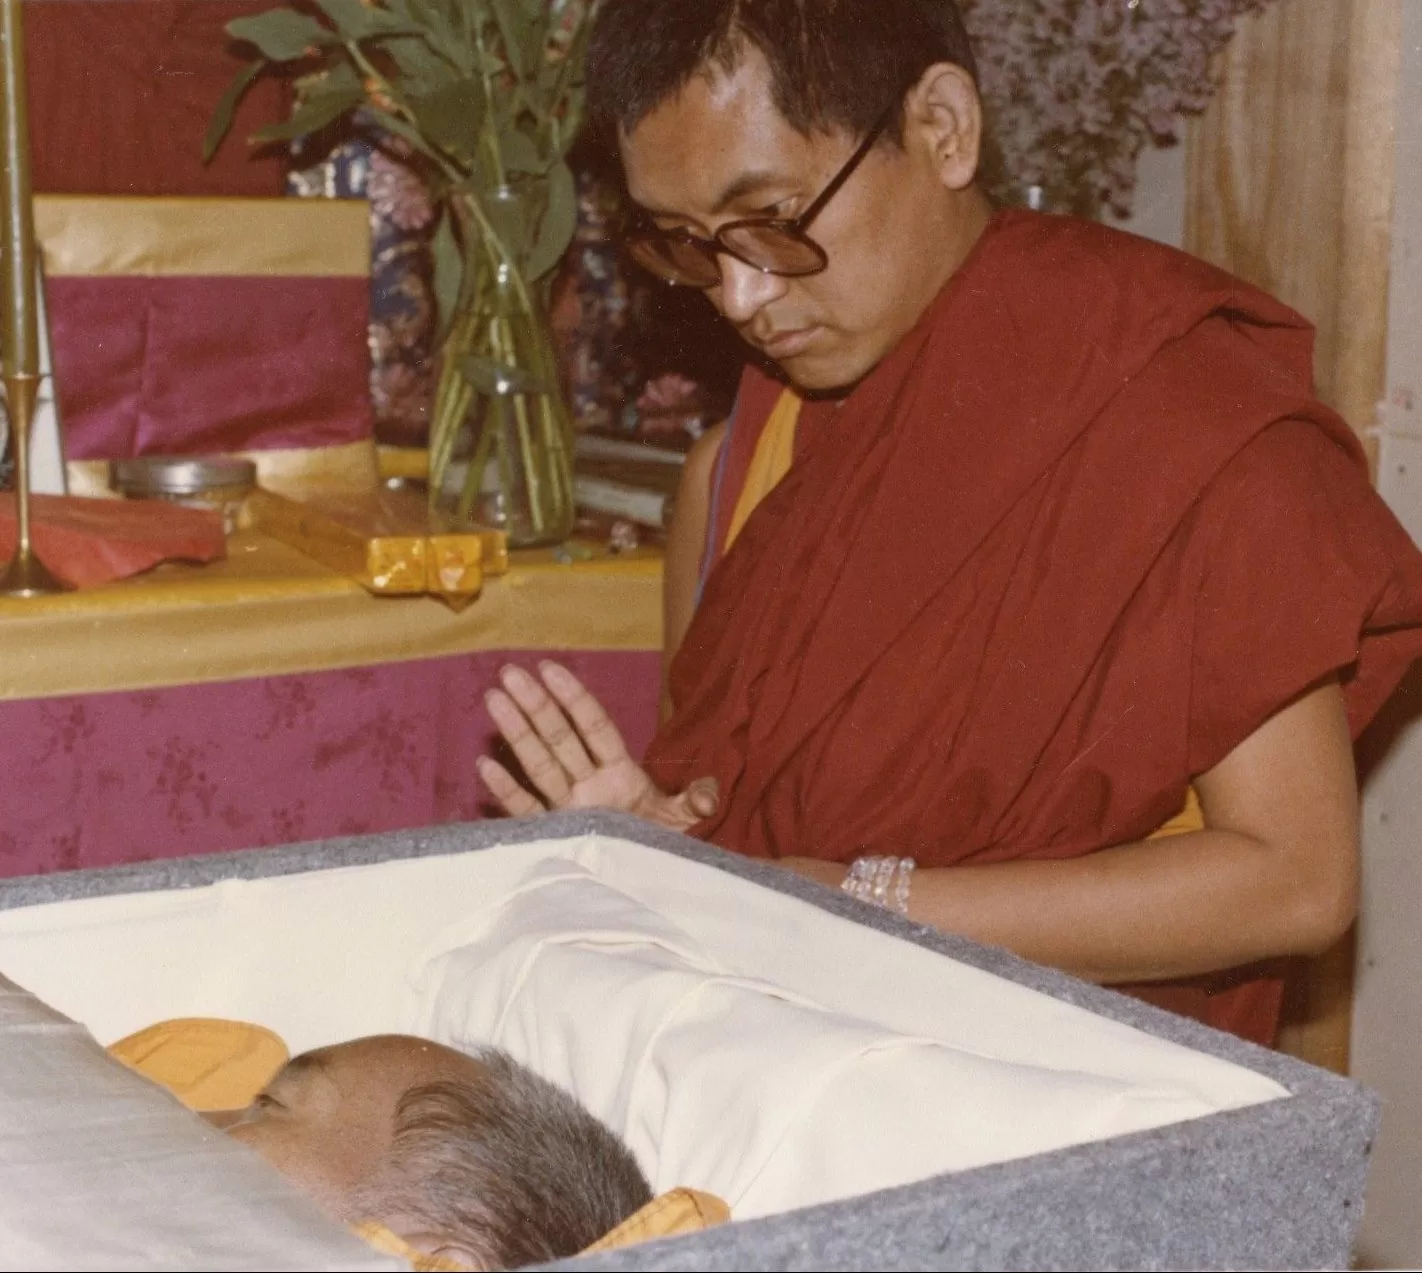 https://fpmt.org/wp-content/webp-express/webp-images/uploads/teachers/zopa/obituary/Rinpoche-with-Lama-in-coffin-1-e1697591358280.jpg.webp